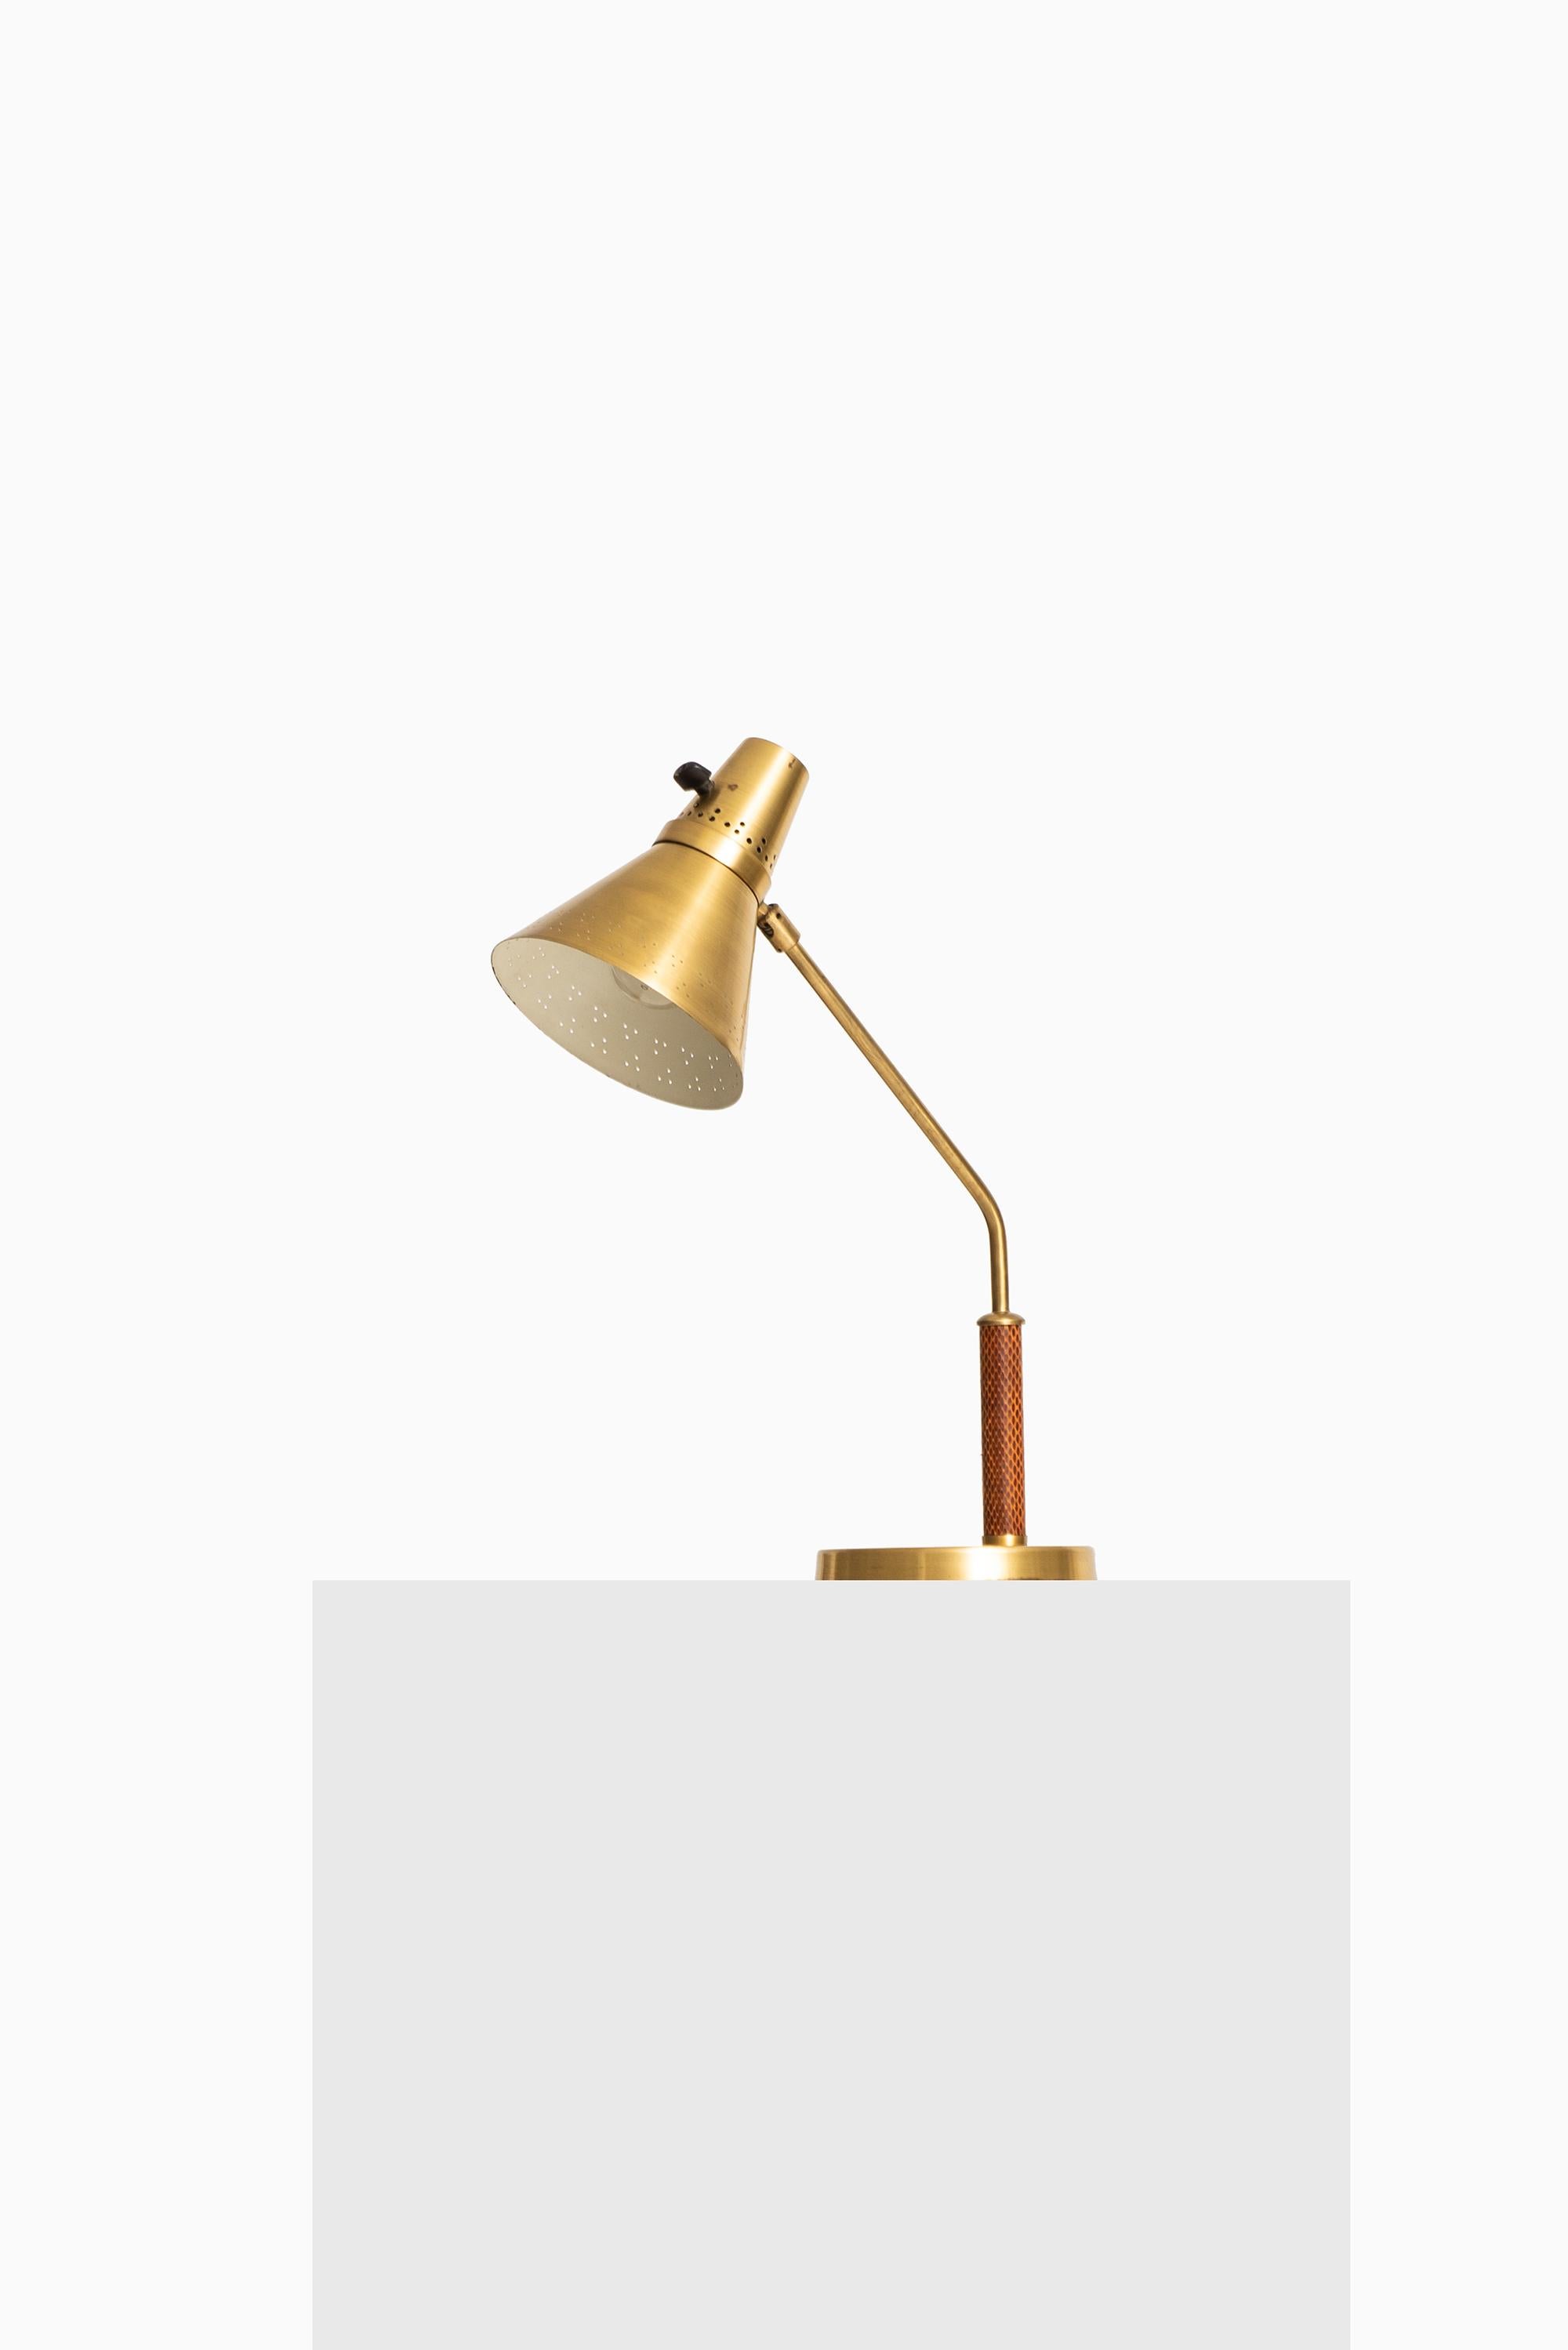 Swedish Table Lamp in Brass and Snakeskin Produced by AB E. Hansson & Co in Sweden For Sale